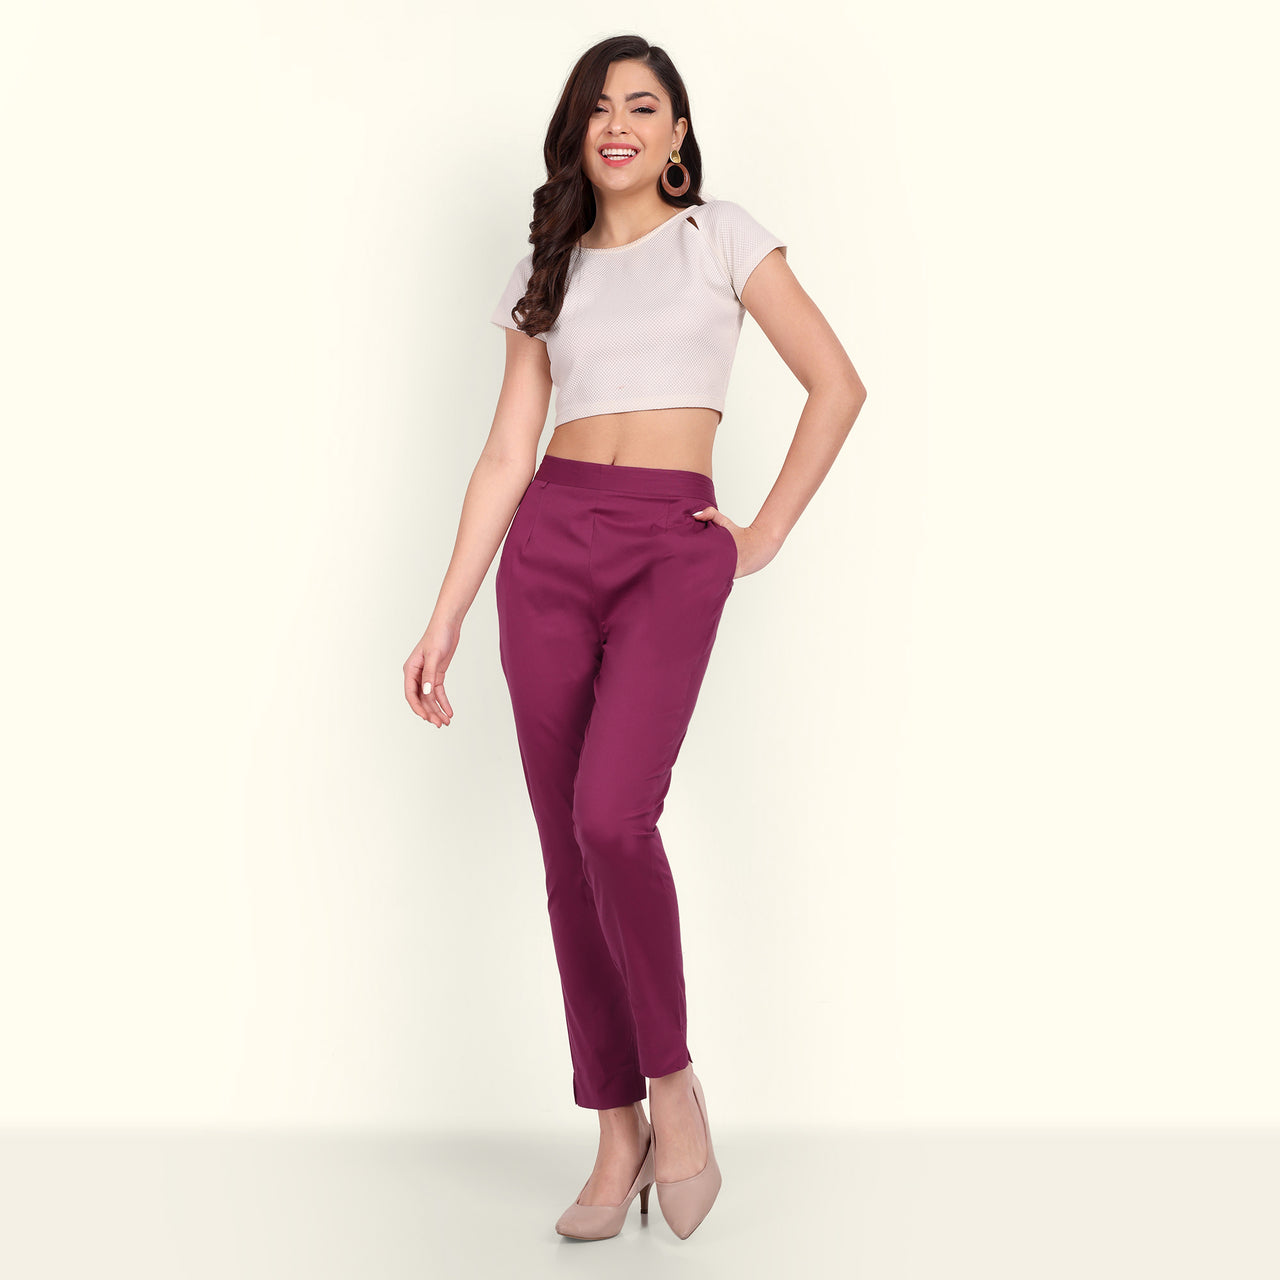 Naariy Rose Taupe Stretchable Cotton Pant